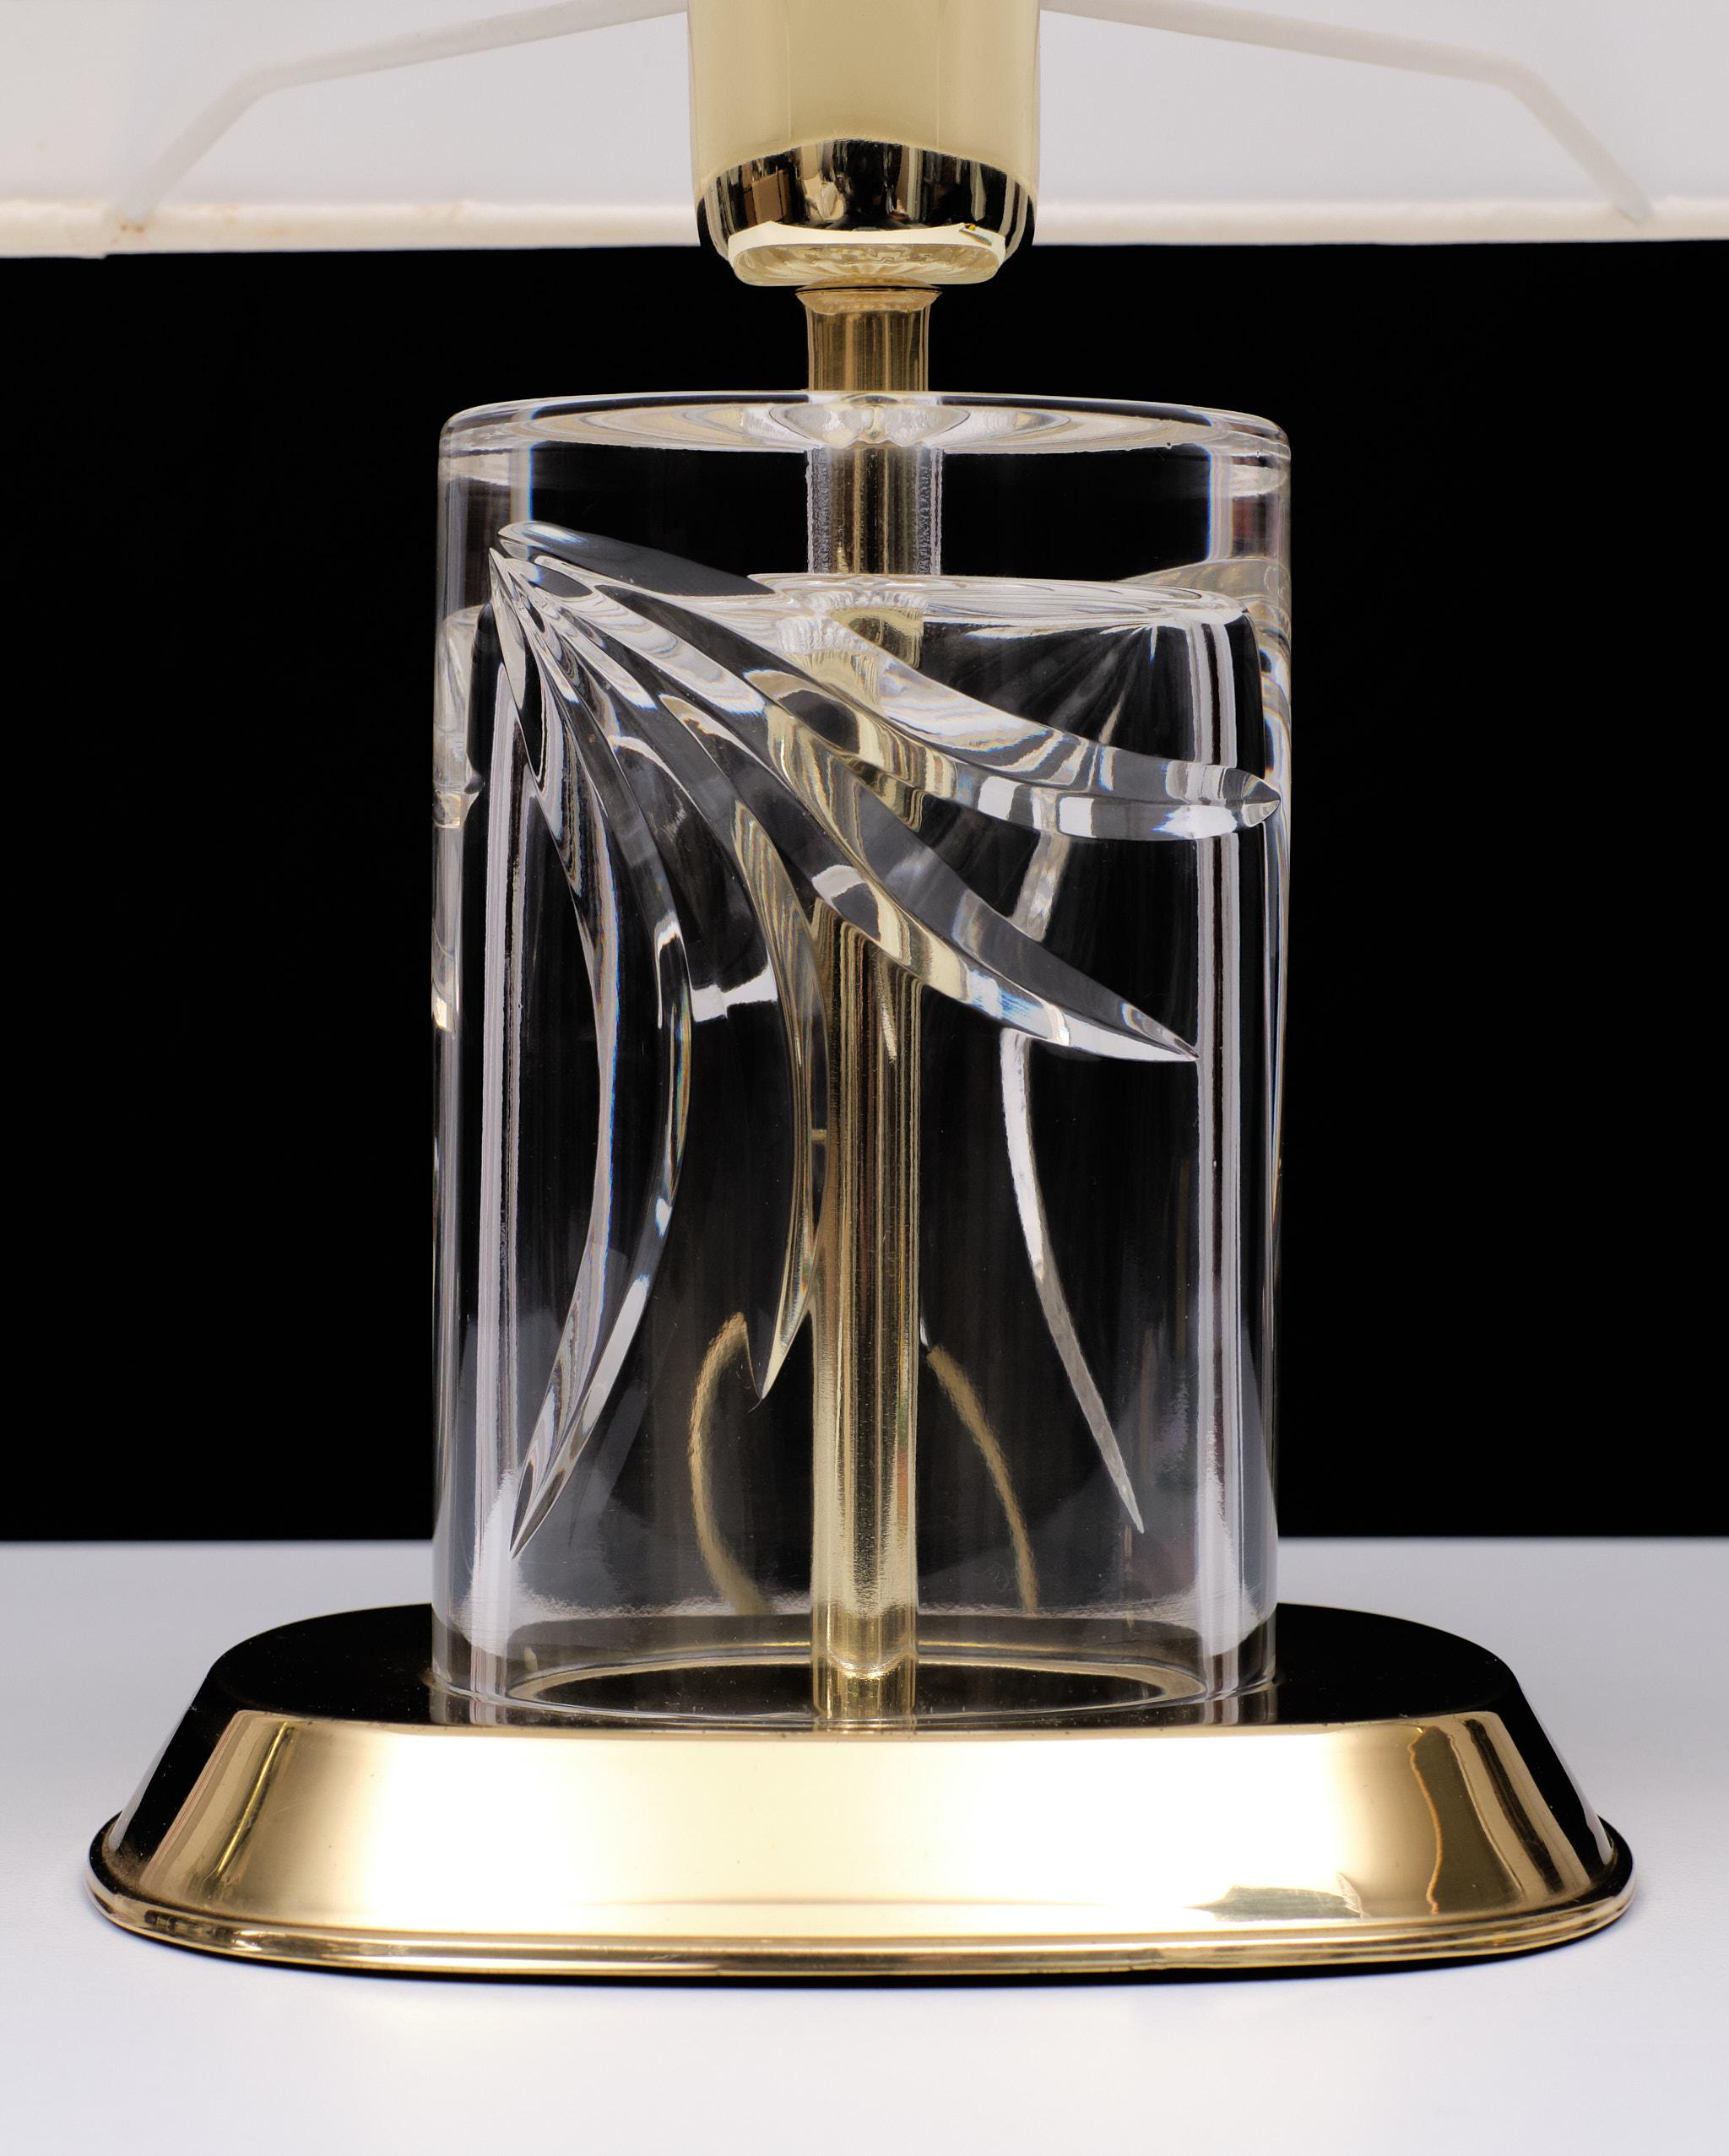 Top quality pristine Bohemian Crystal Table  lamp .Made in Czech Republic
by  Preciosa glass company . Brass base and fitting  ,comes with its original shade . Excellent condition . 
one large E27 bulb needed . 